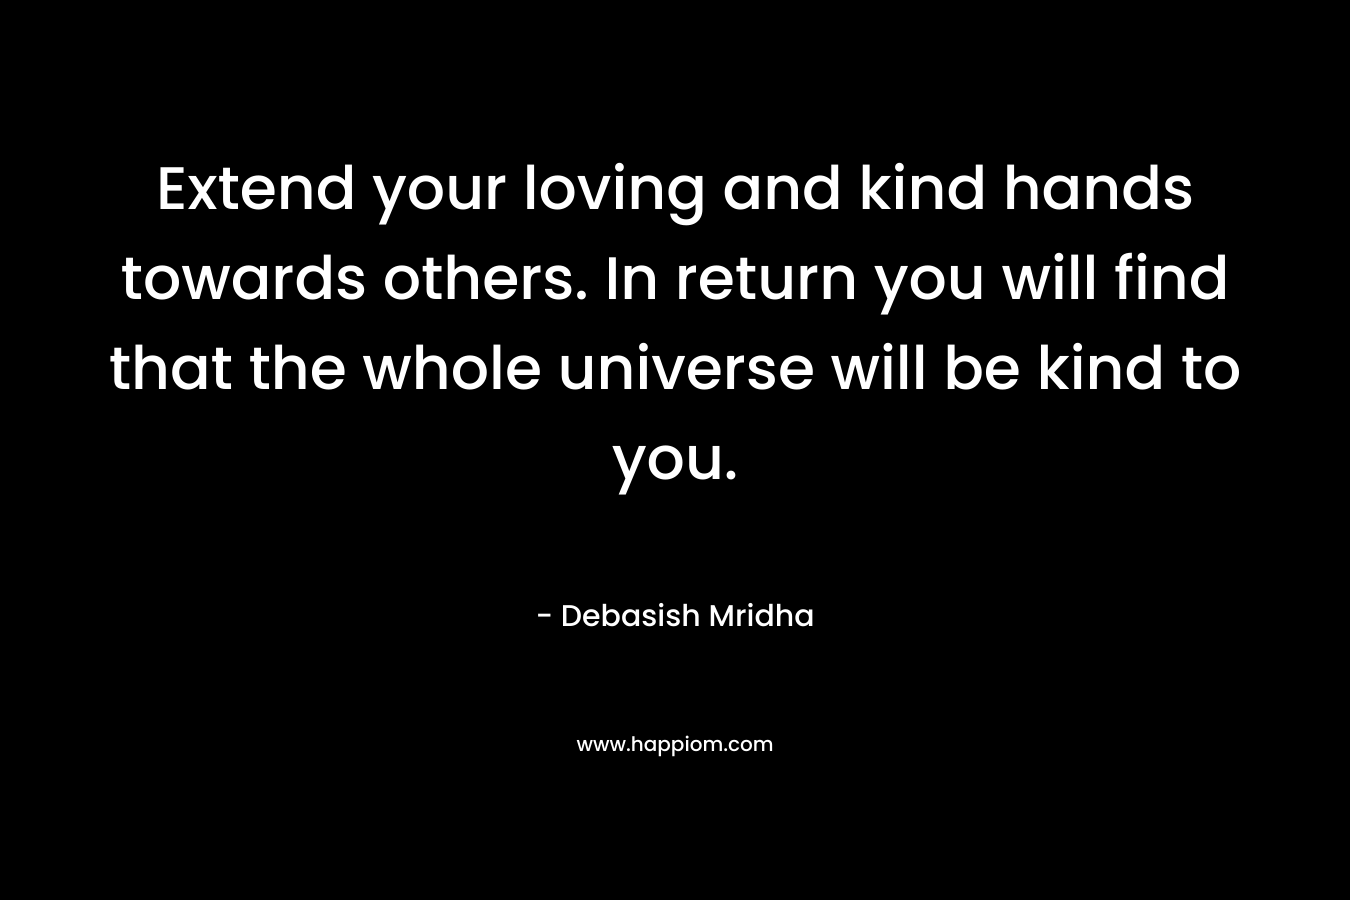 Extend your loving and kind hands towards others. In return you will find that the whole universe will be kind to you.